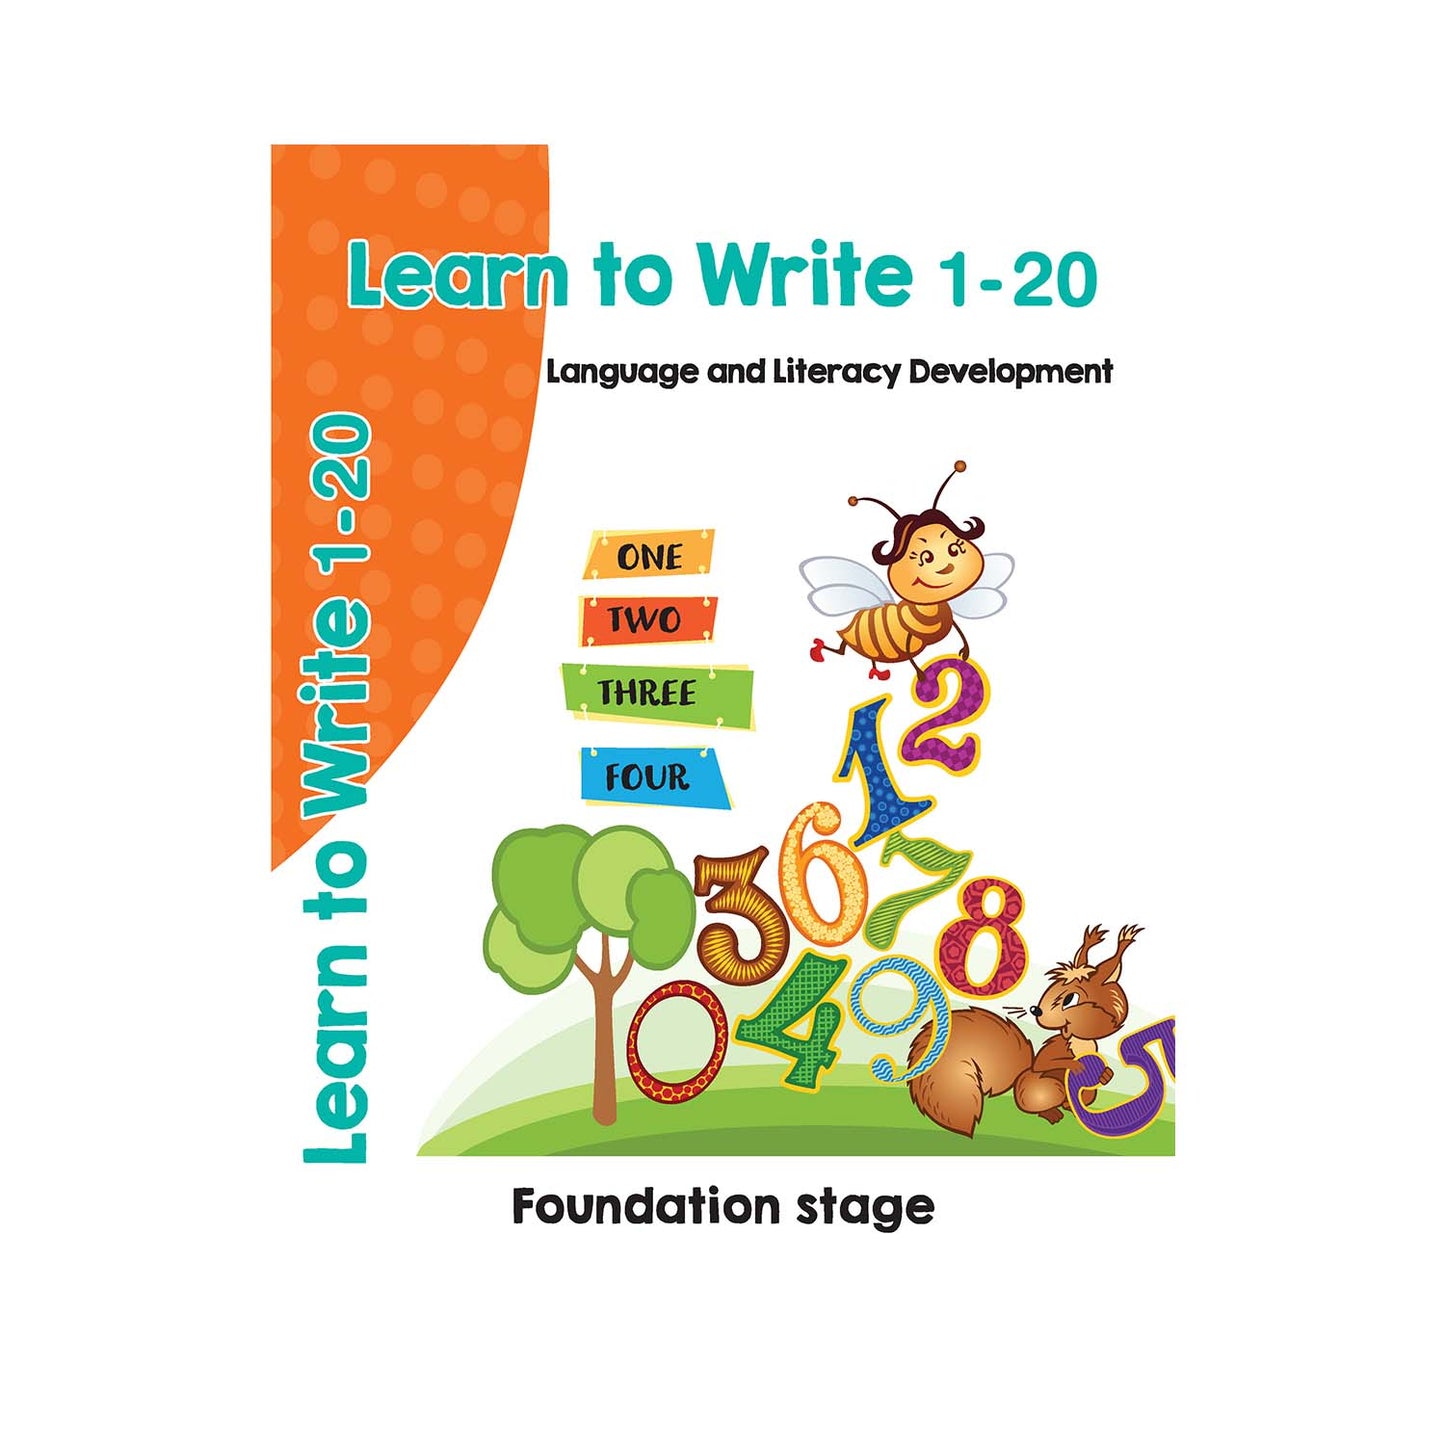 Learn to Write 1-20 Language and Literacy Development